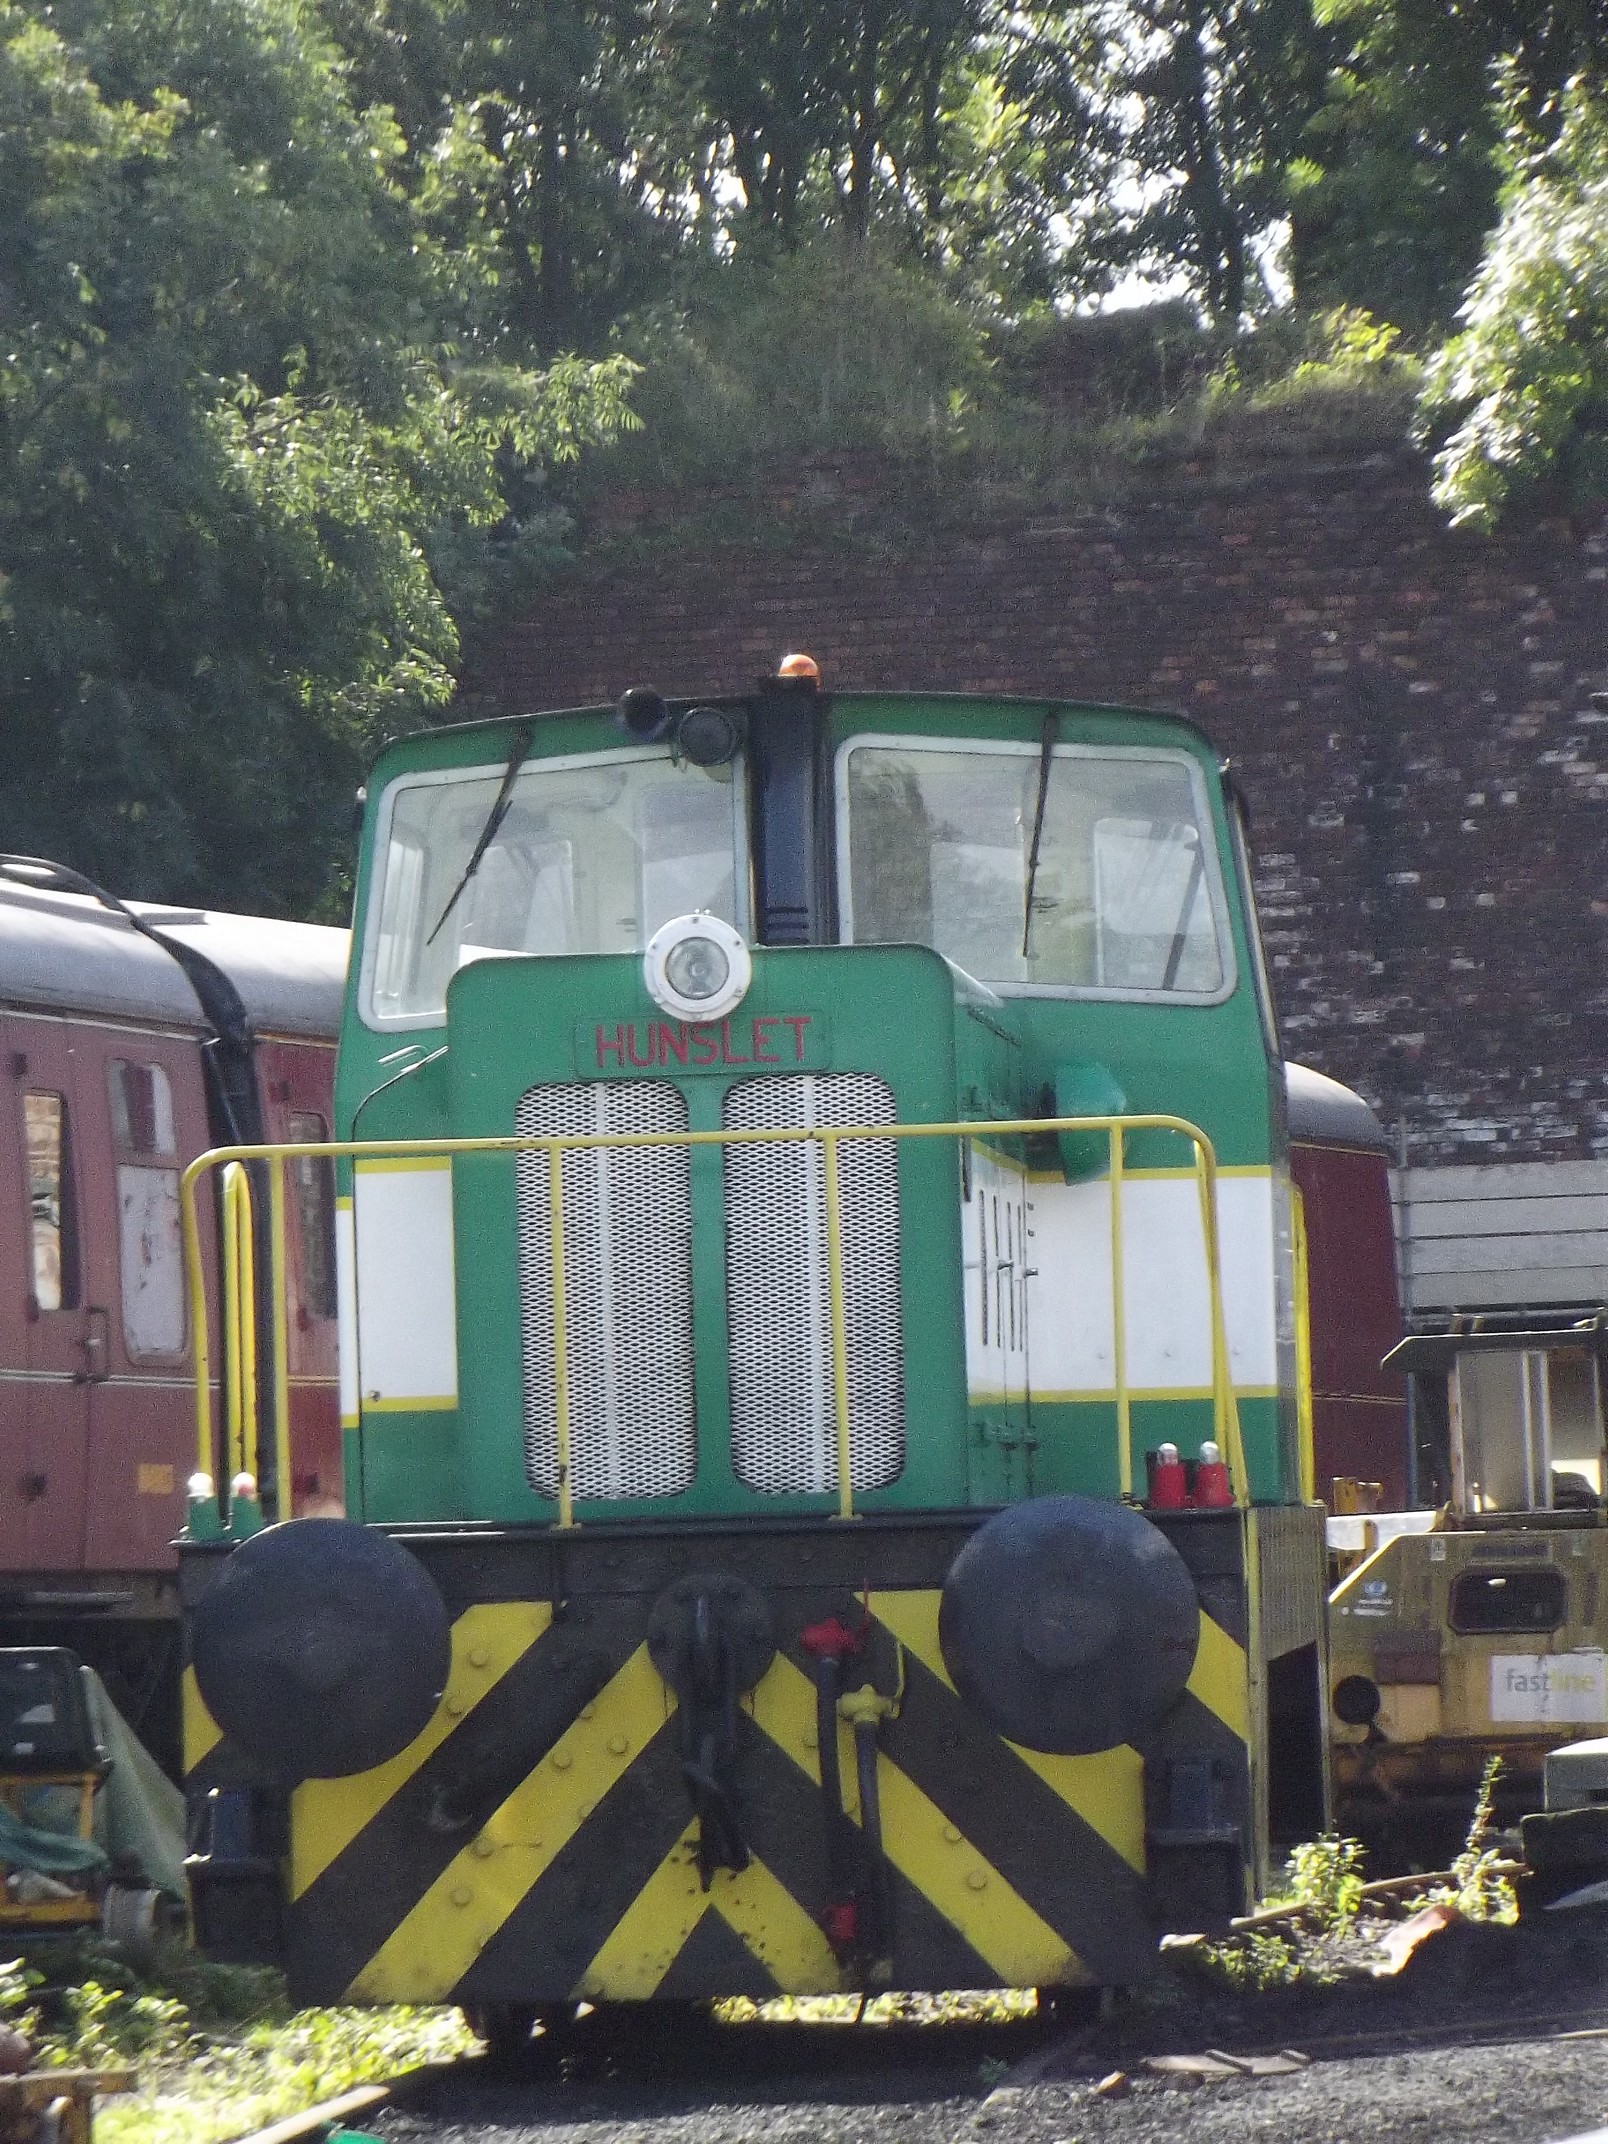 a green train engine in the middle of some tracks